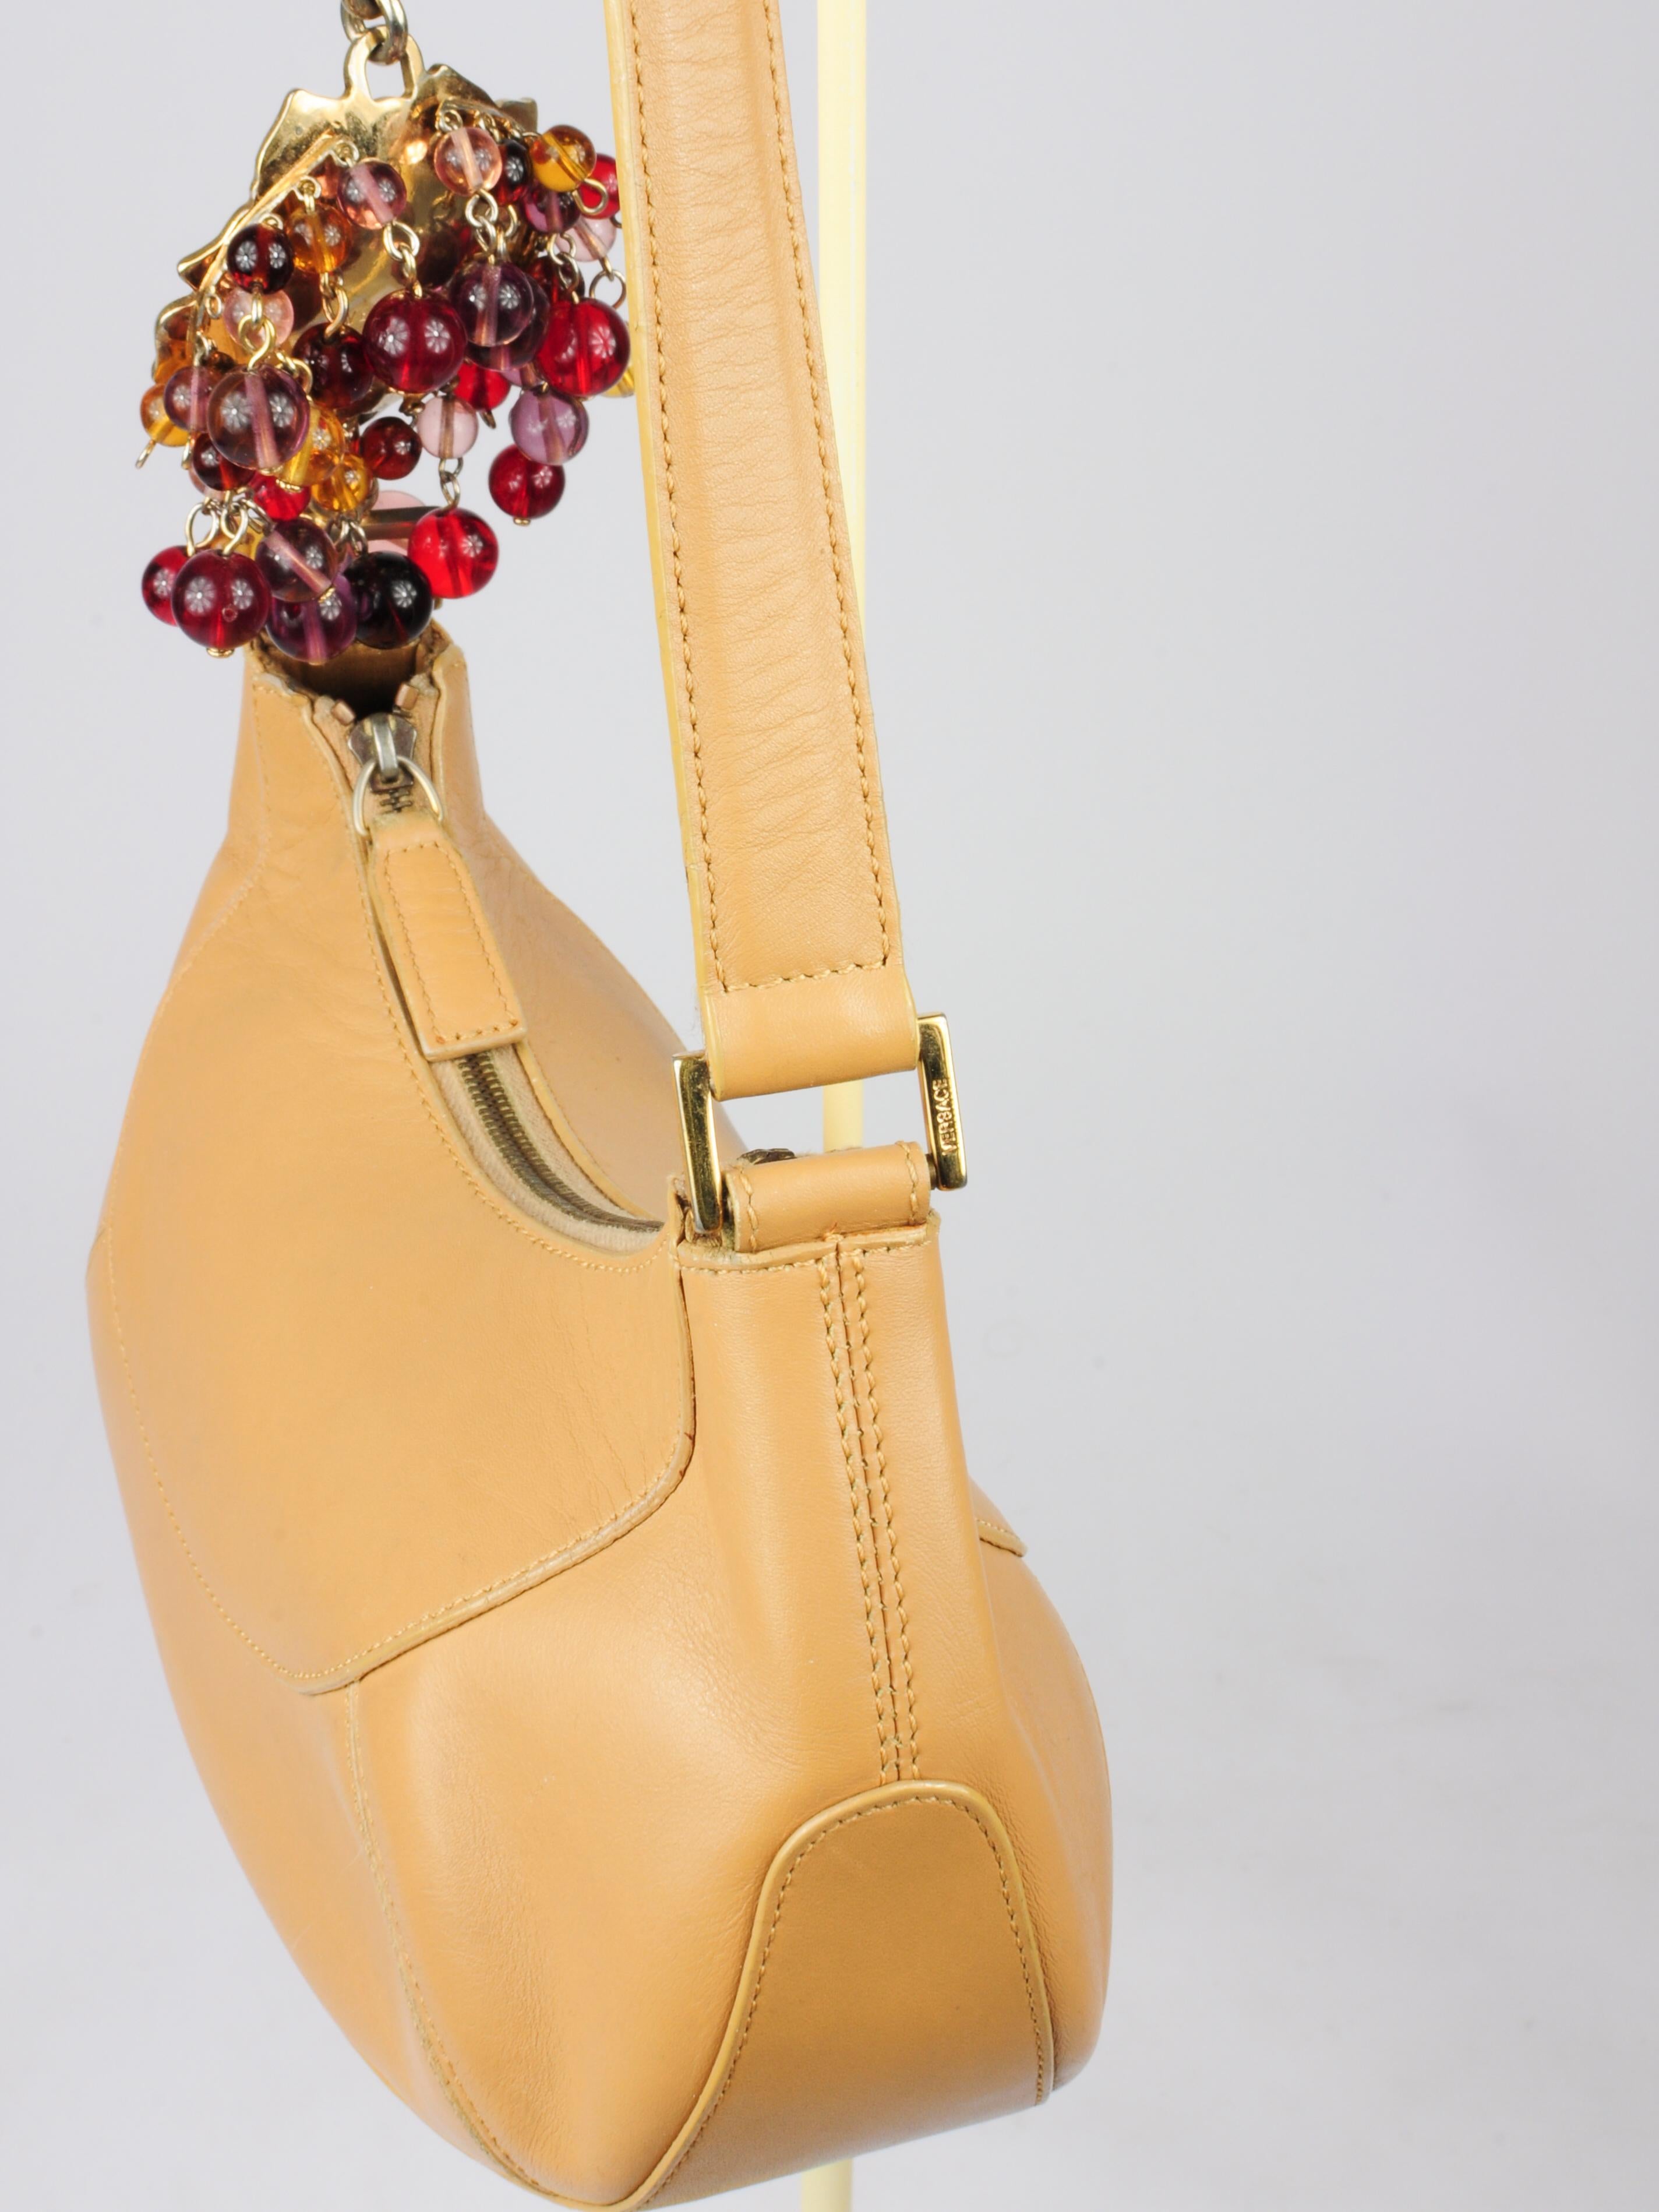 Gianni Versace Mini Shoulder Bag with Camellia Flower Glass Beads Details 2000s For Sale 1